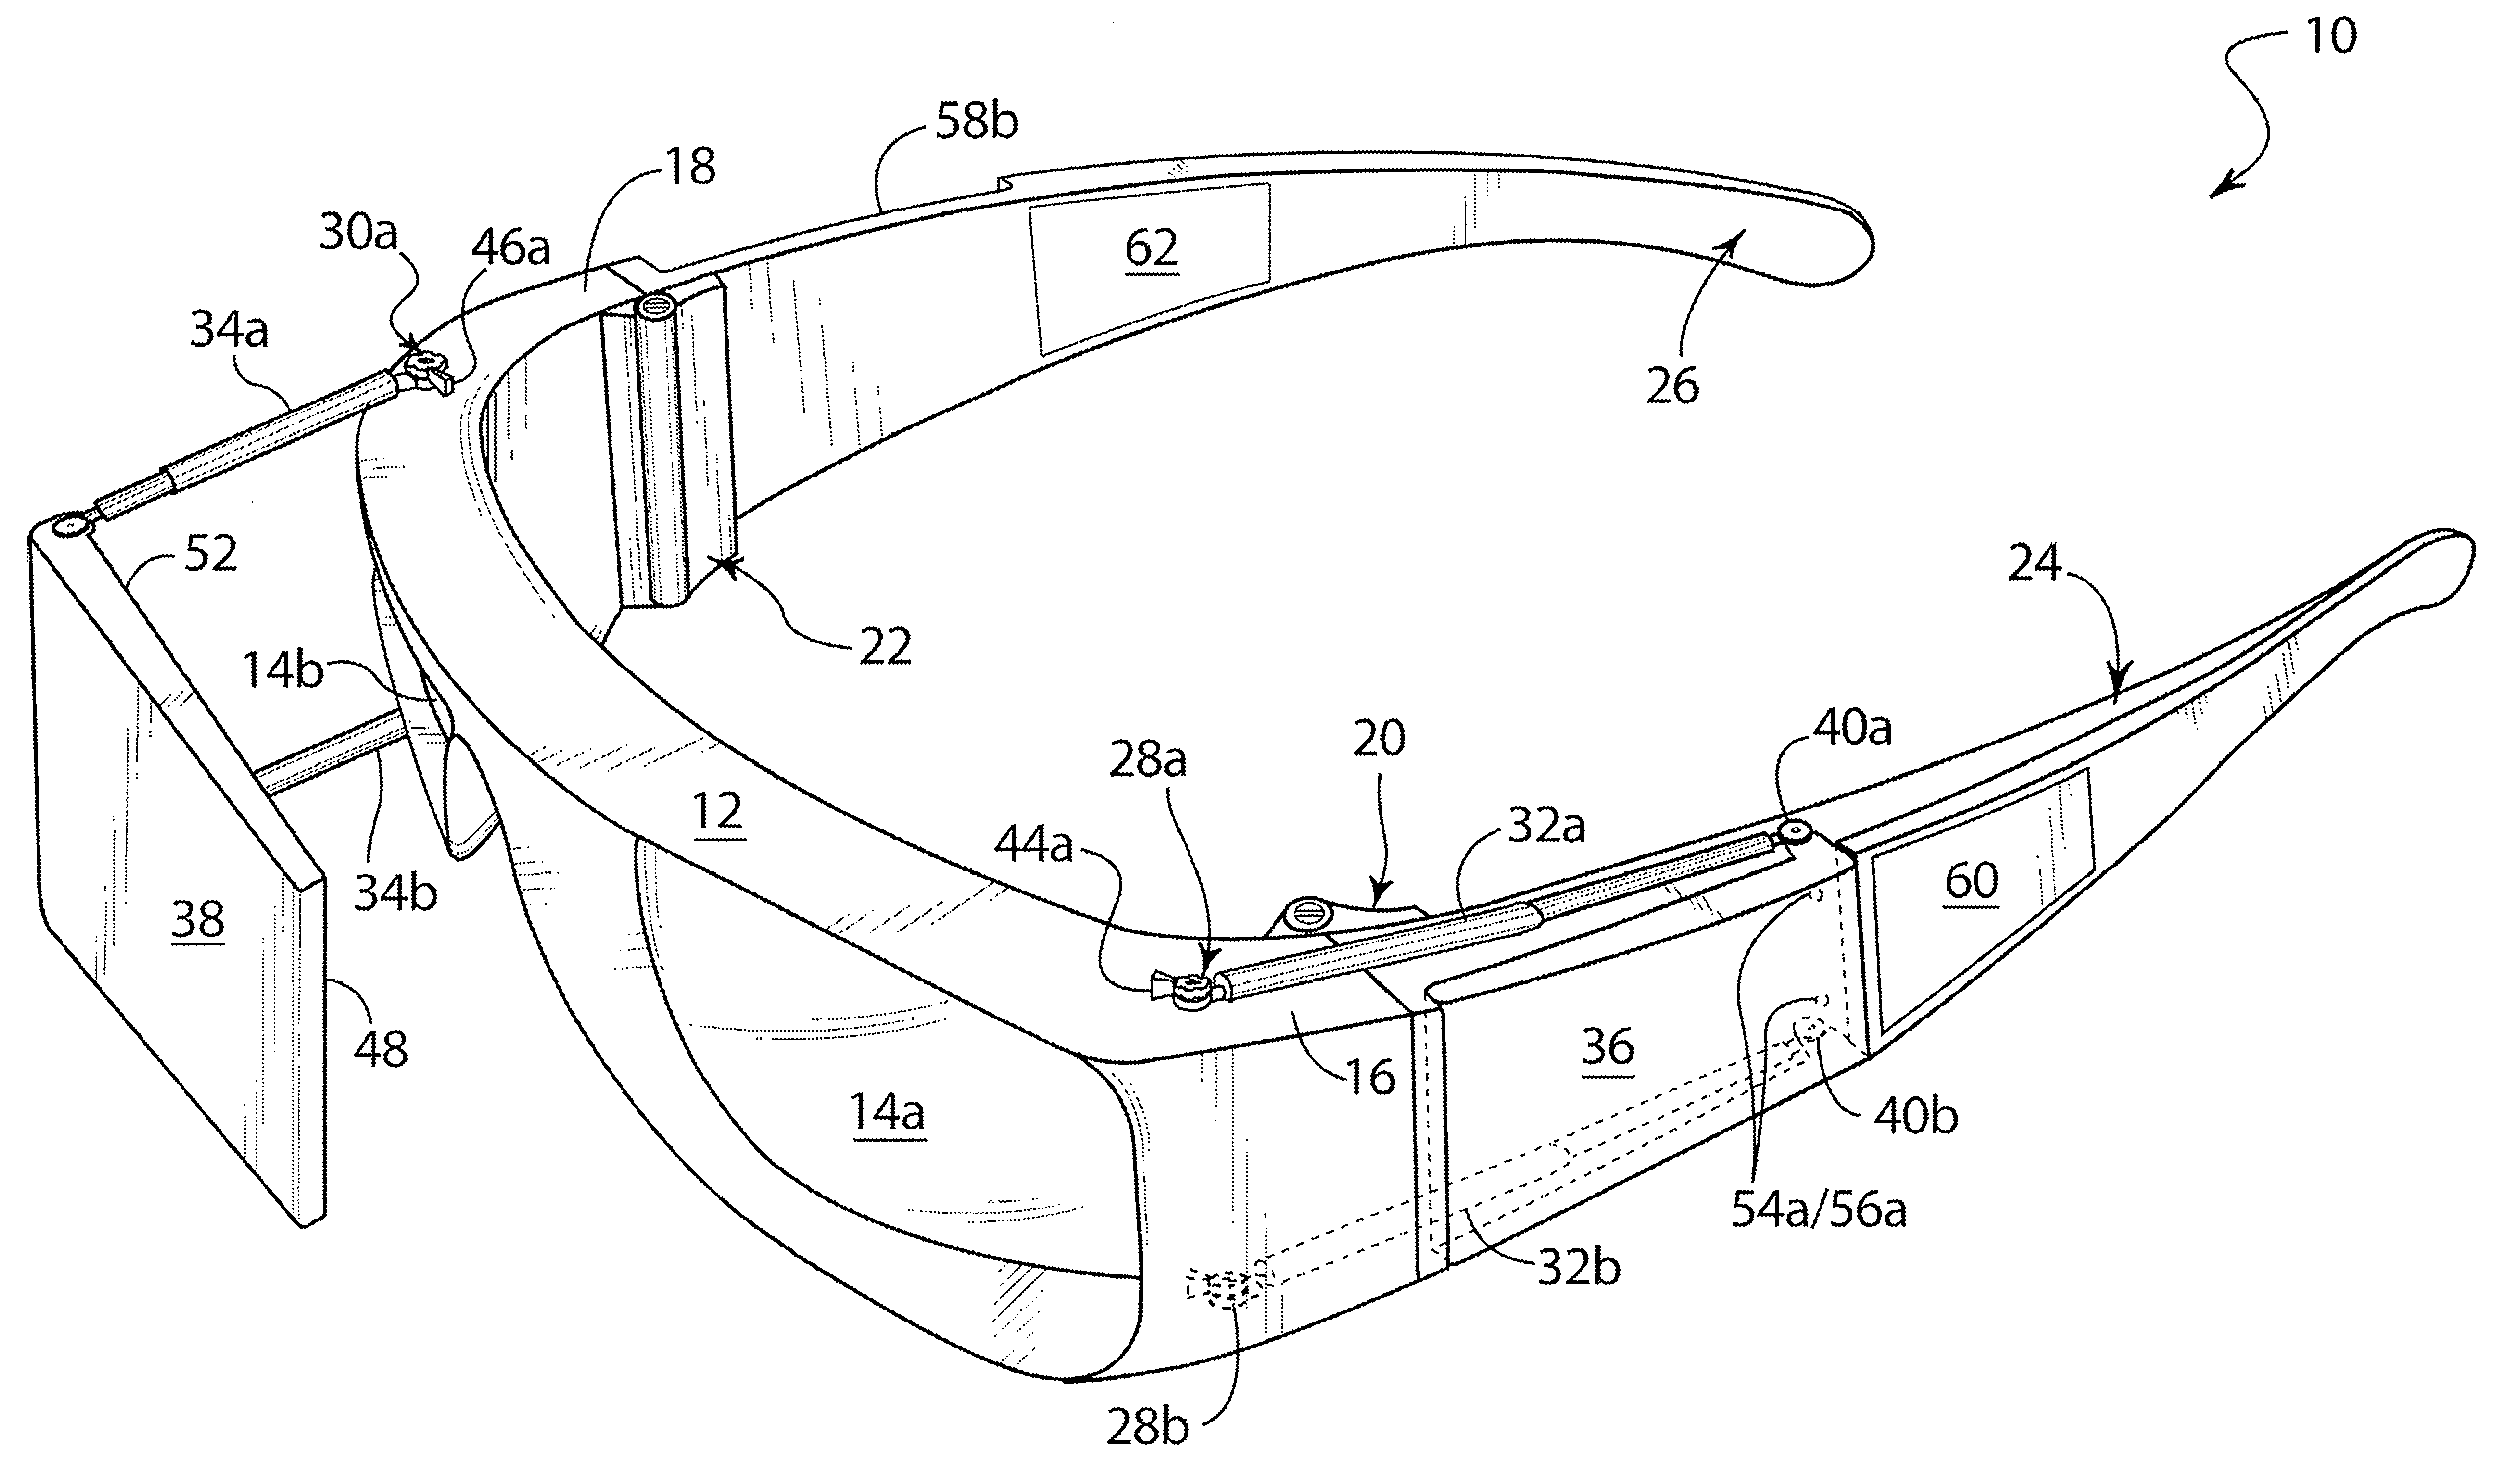 Eyeglasses with integrated telescoping video display